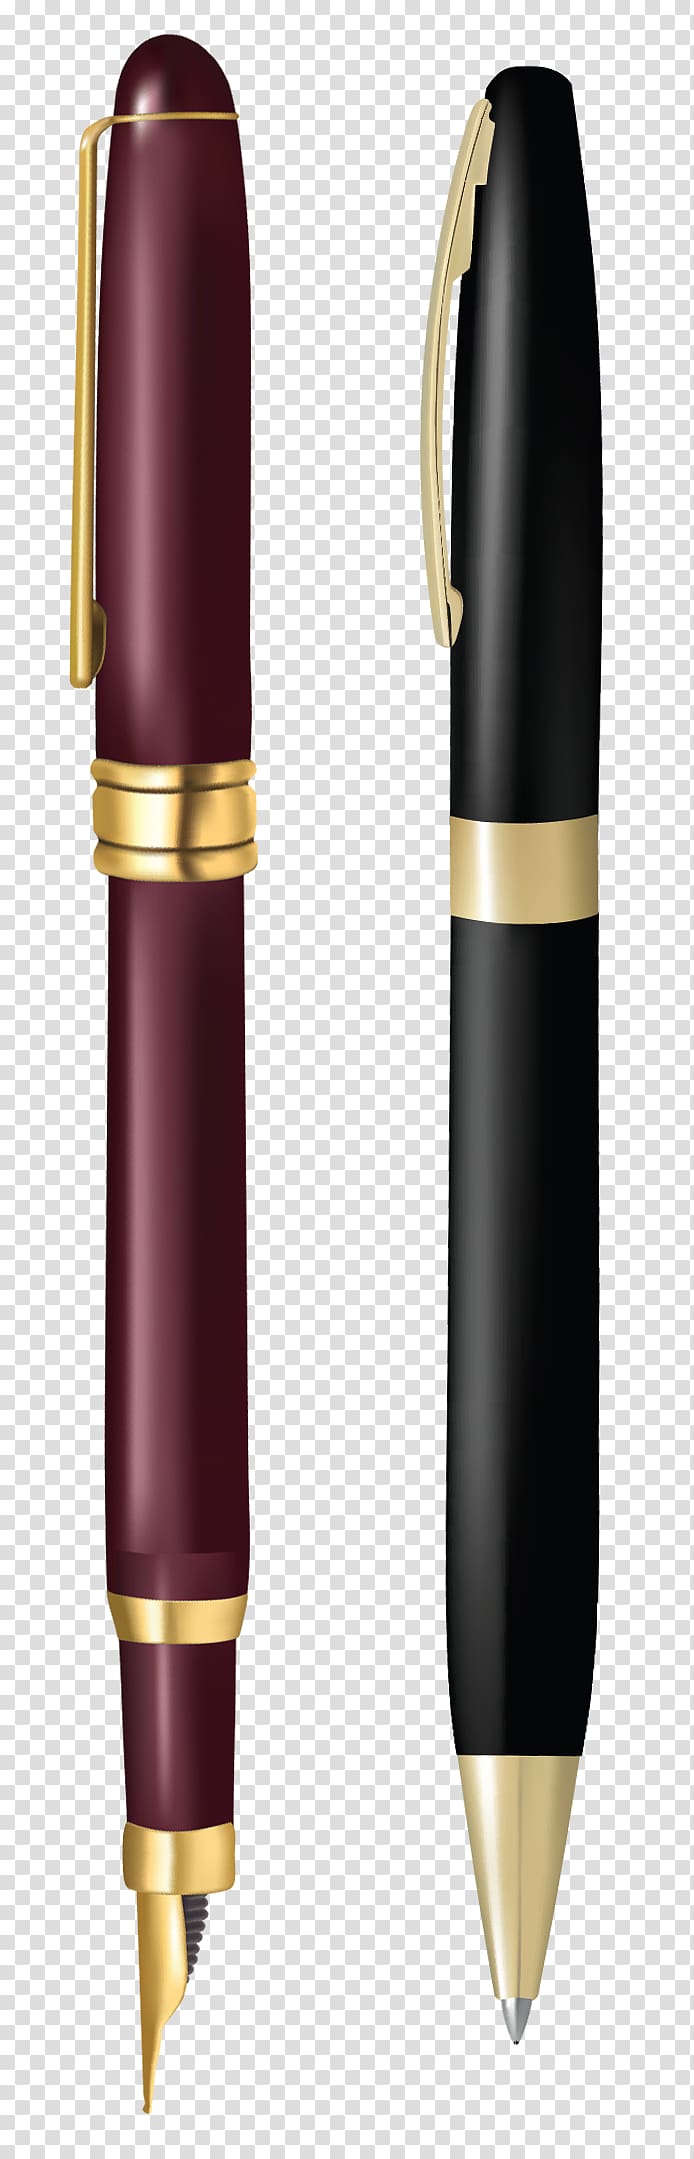 two maroon and black pen, Ballpoint pen artwork Writing implement , Pen and Ballpoint Pen transparent background PNG clipart